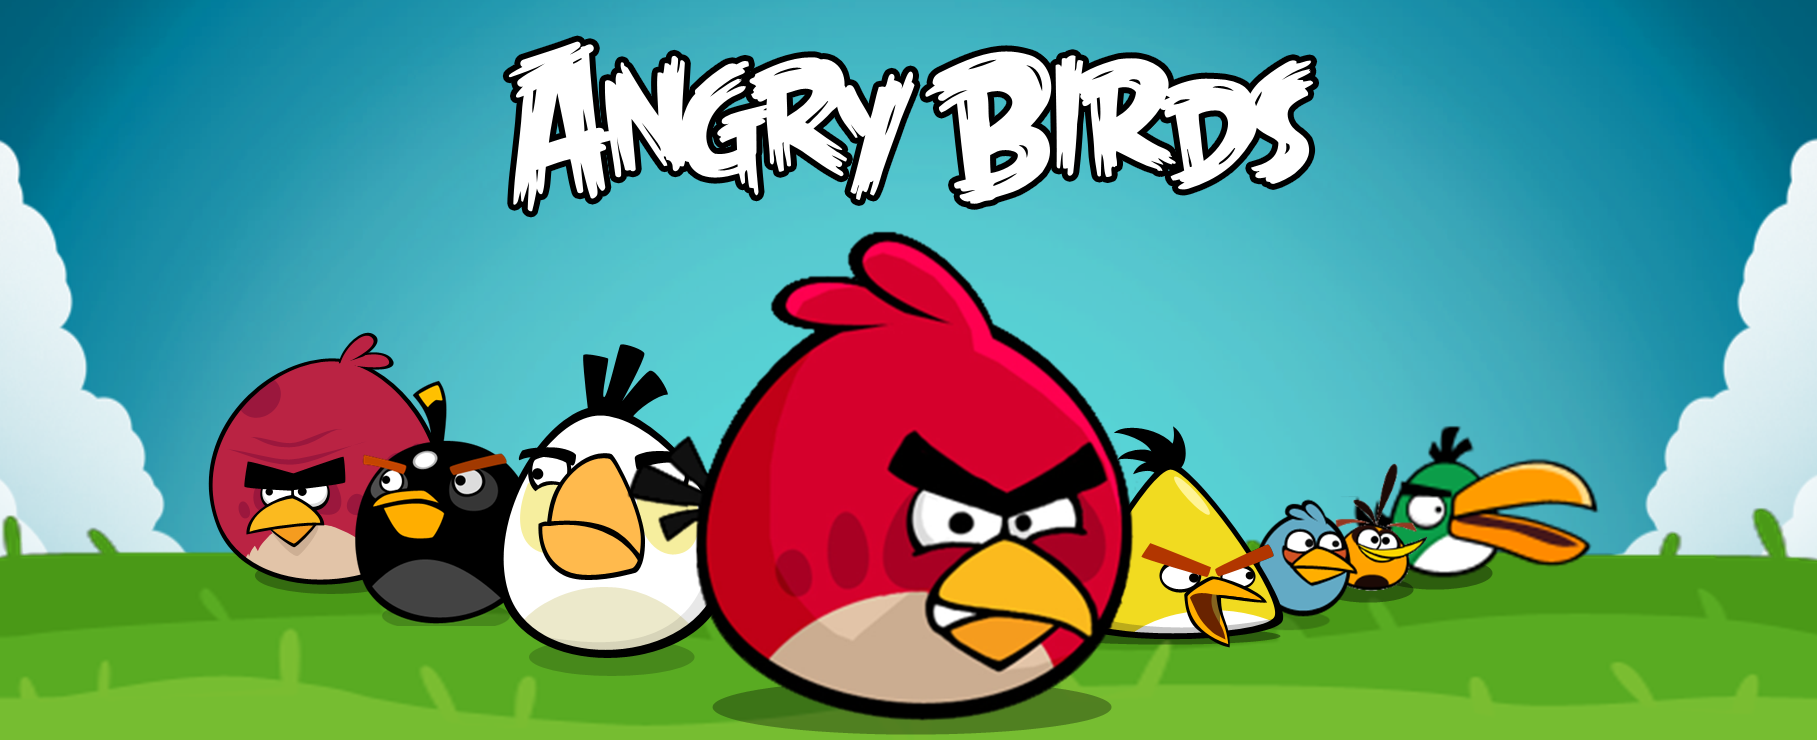 Angry Birds Wallpaper Collection (40+)